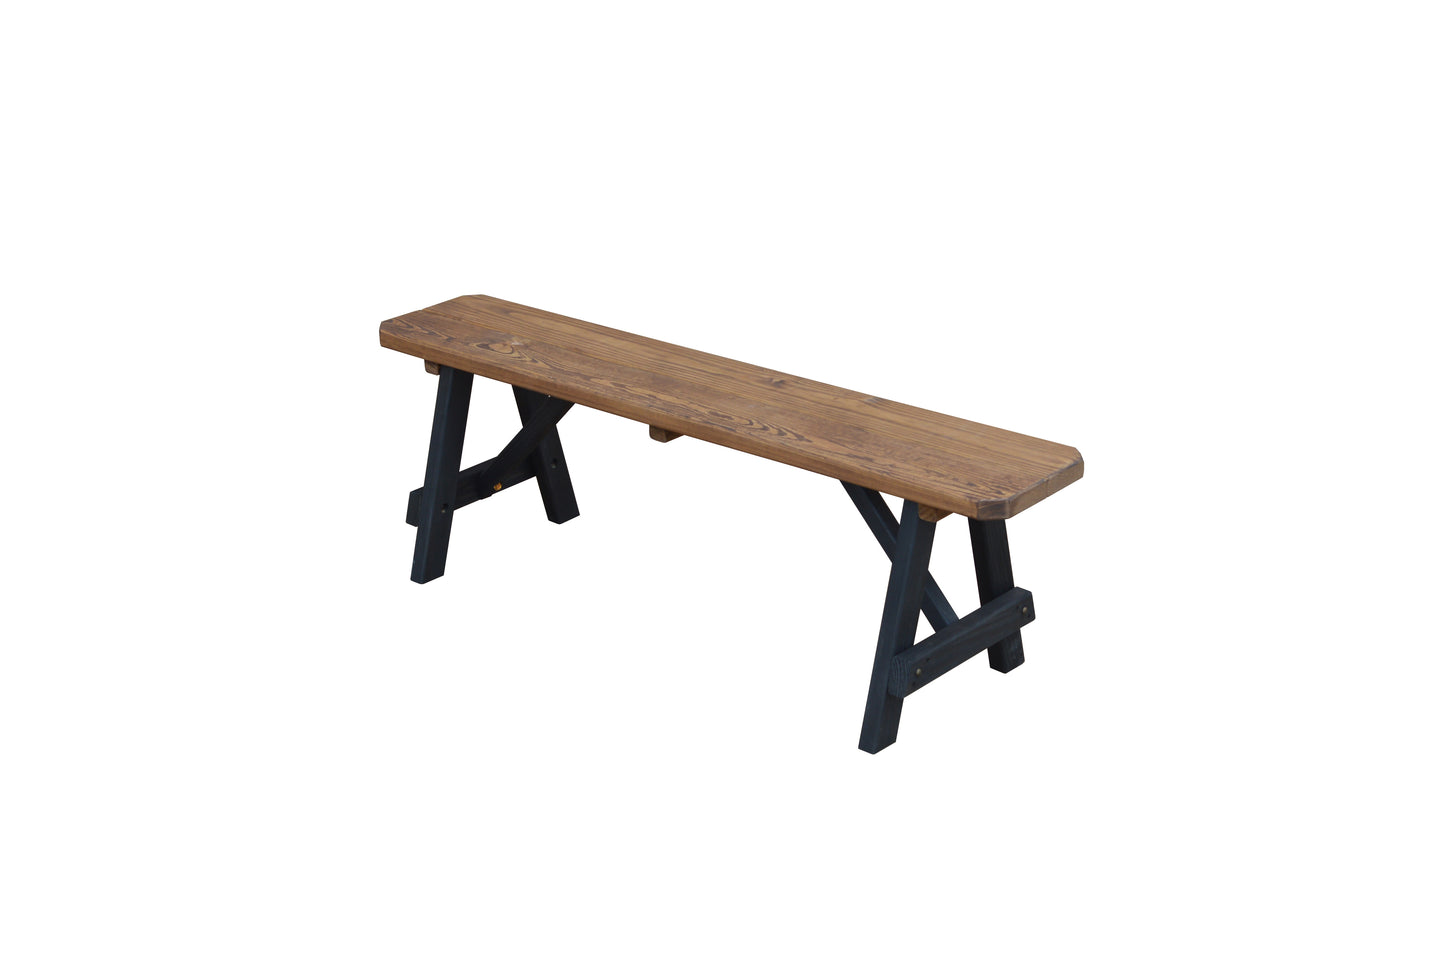 A&L Furniture Co. Pressure Treated Pine 5" Traditional Bench Only Mushroom on Black - LEAD TIME TO SHIP 10 BUSINESS DAYS